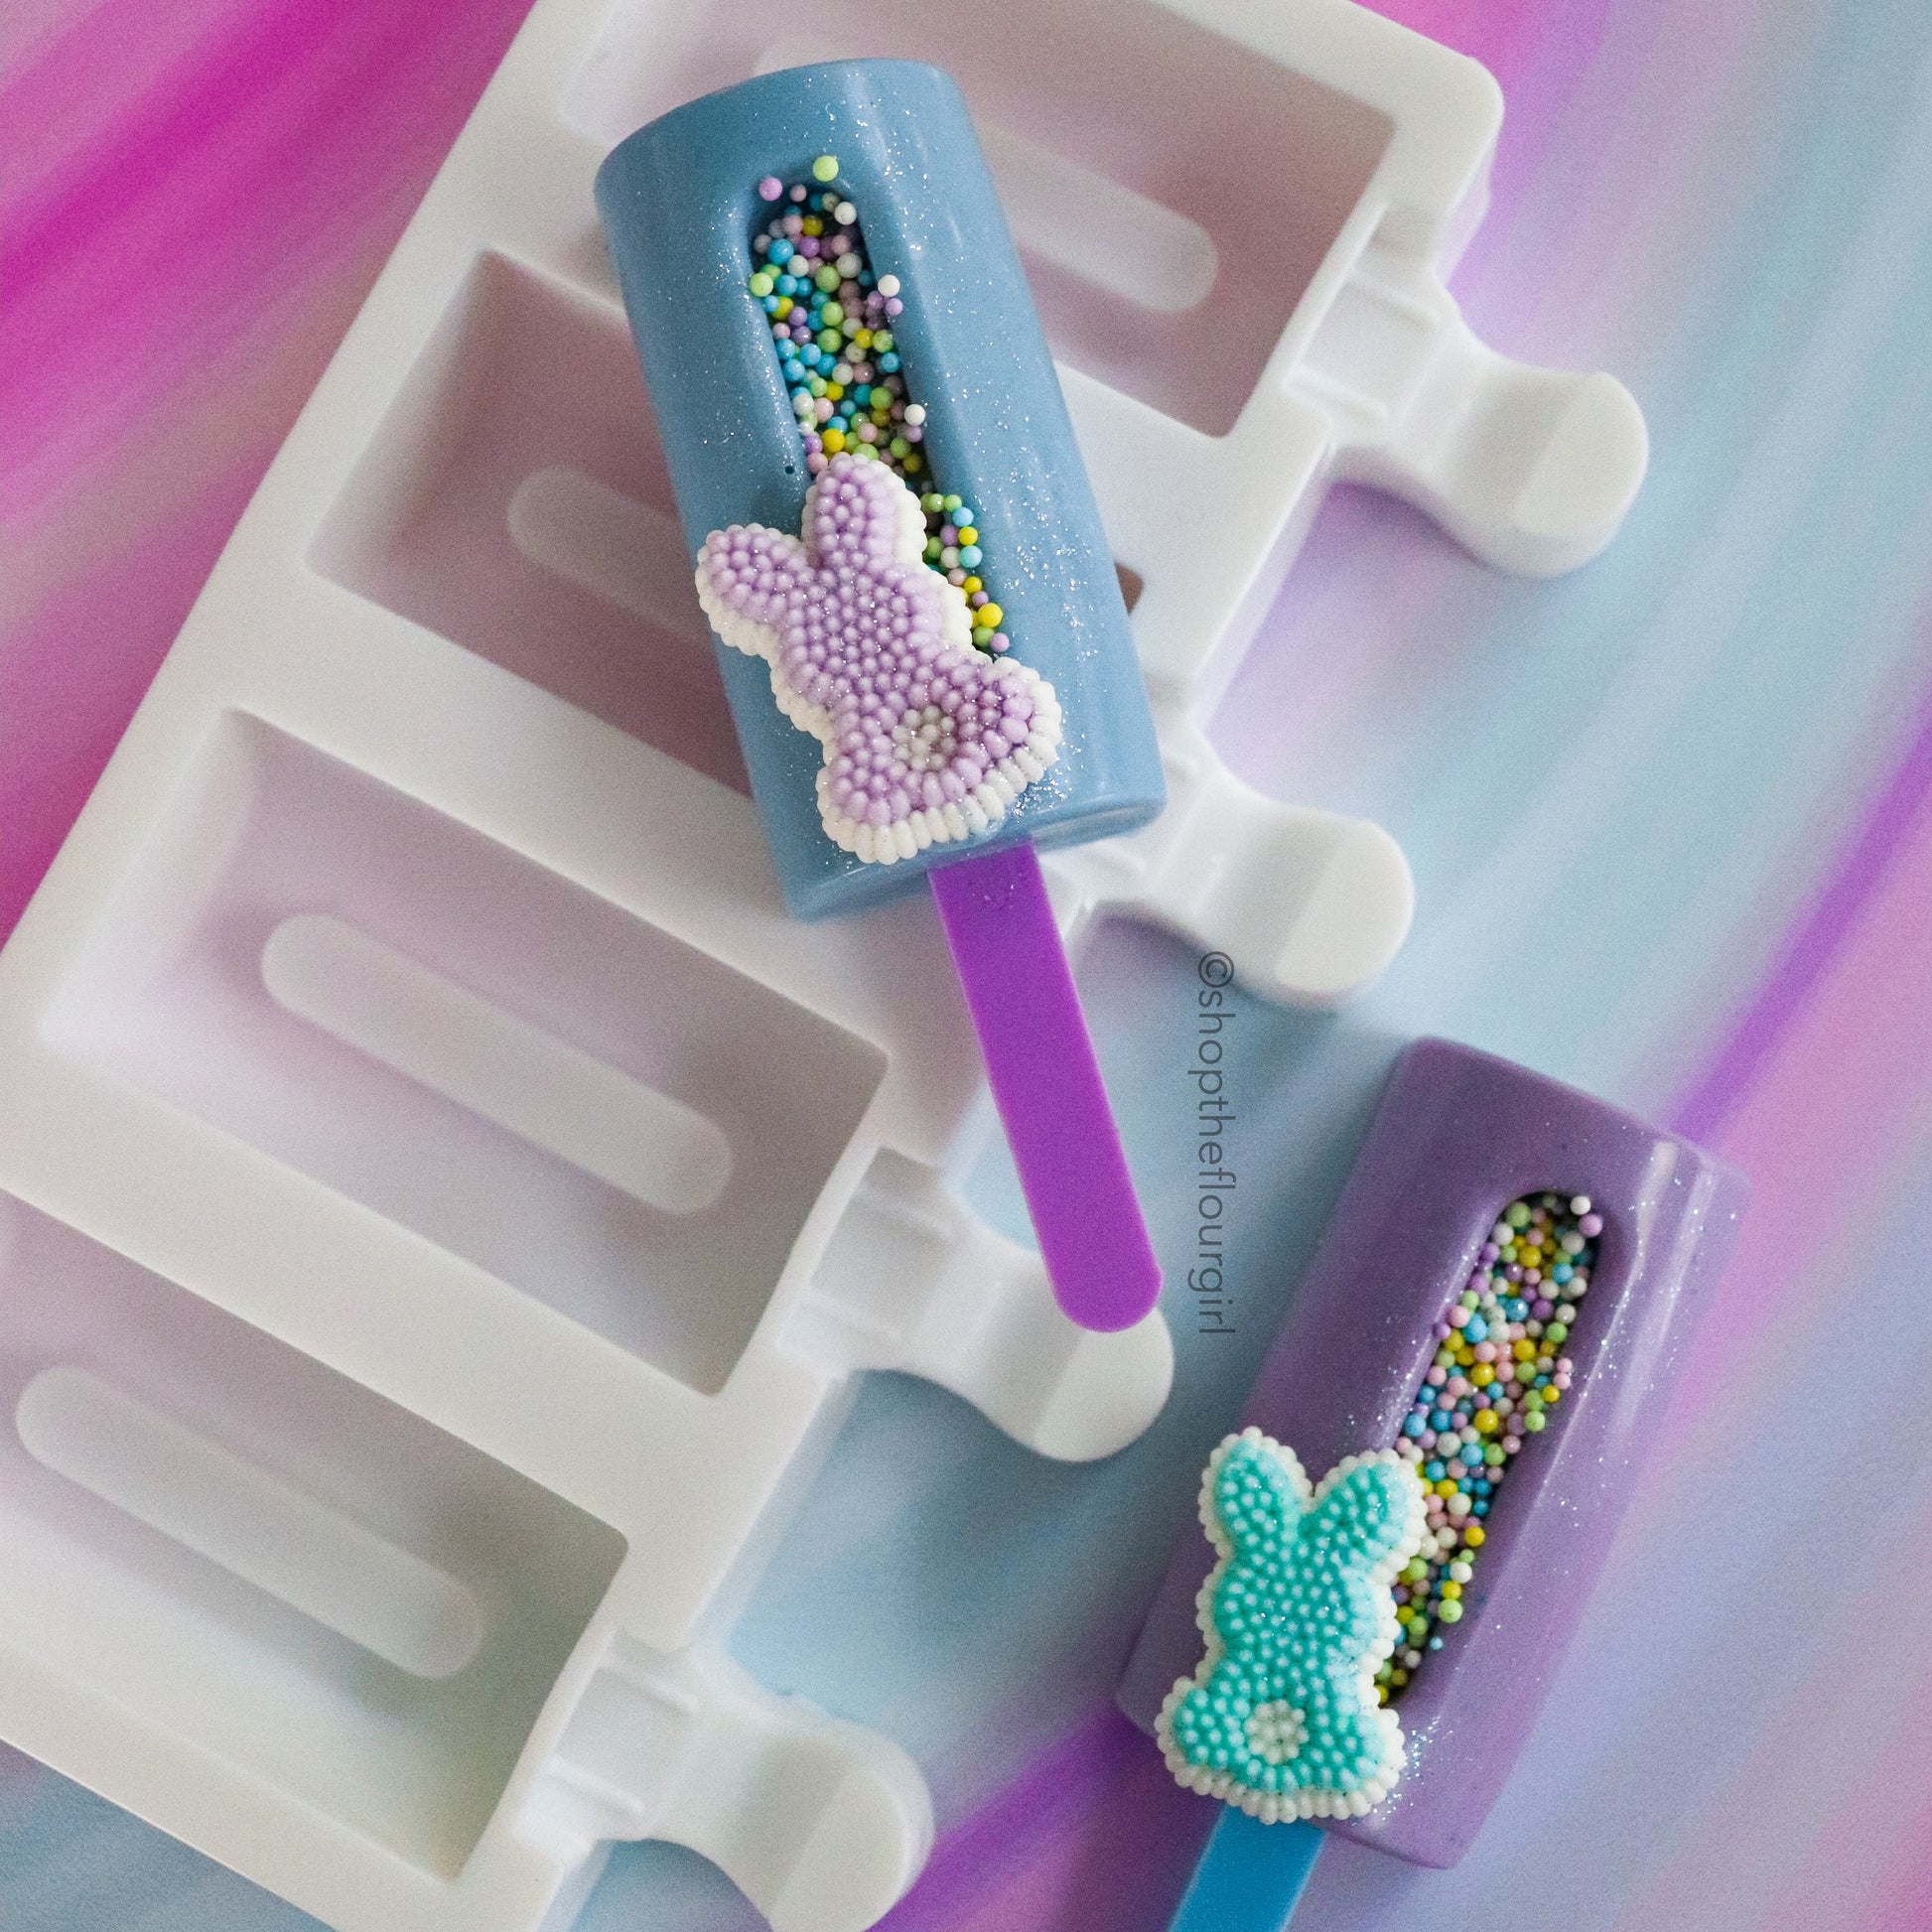 Silicone Cakesicle Mold | Lana Mini Mold | Fancy Sprinkles | Fancy Sprinkles